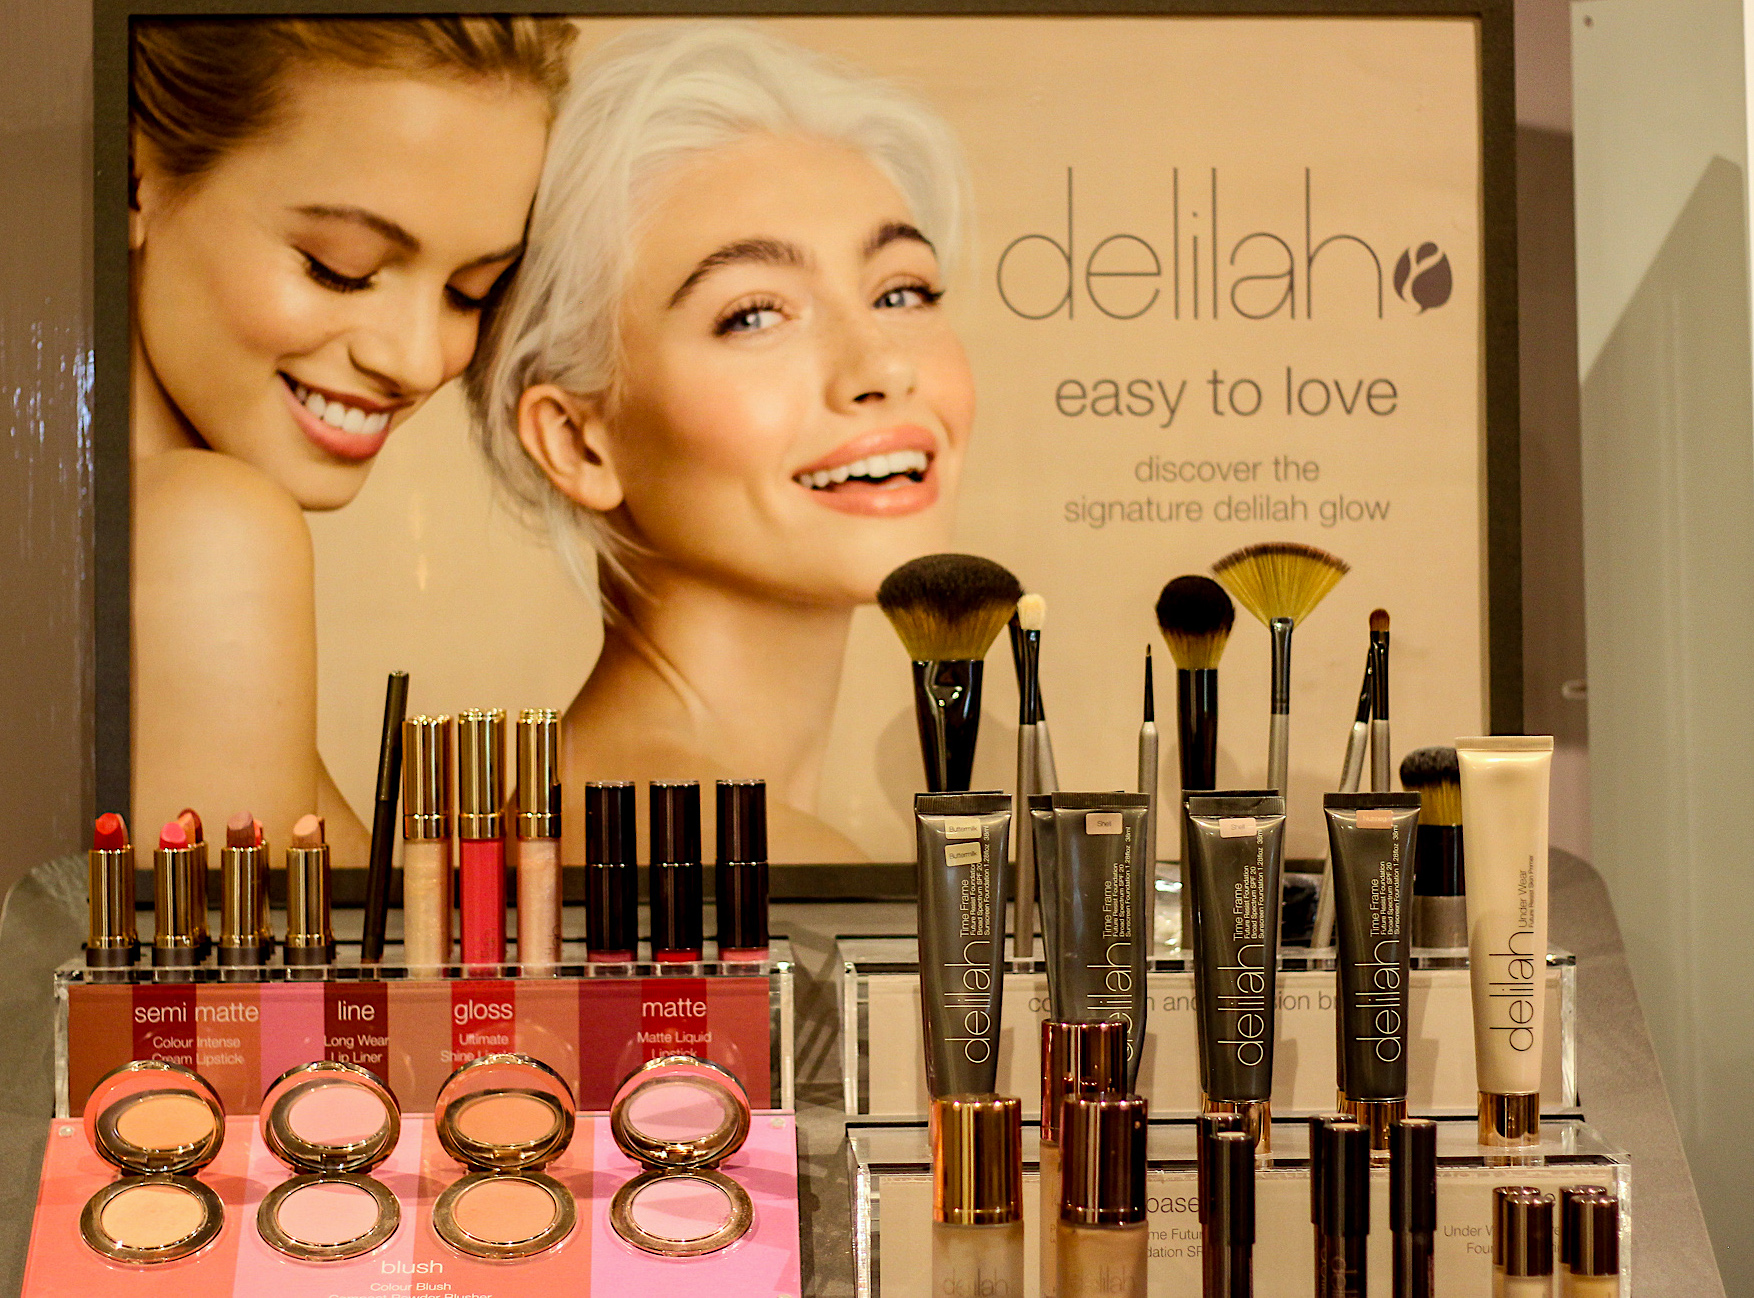 Delilah products